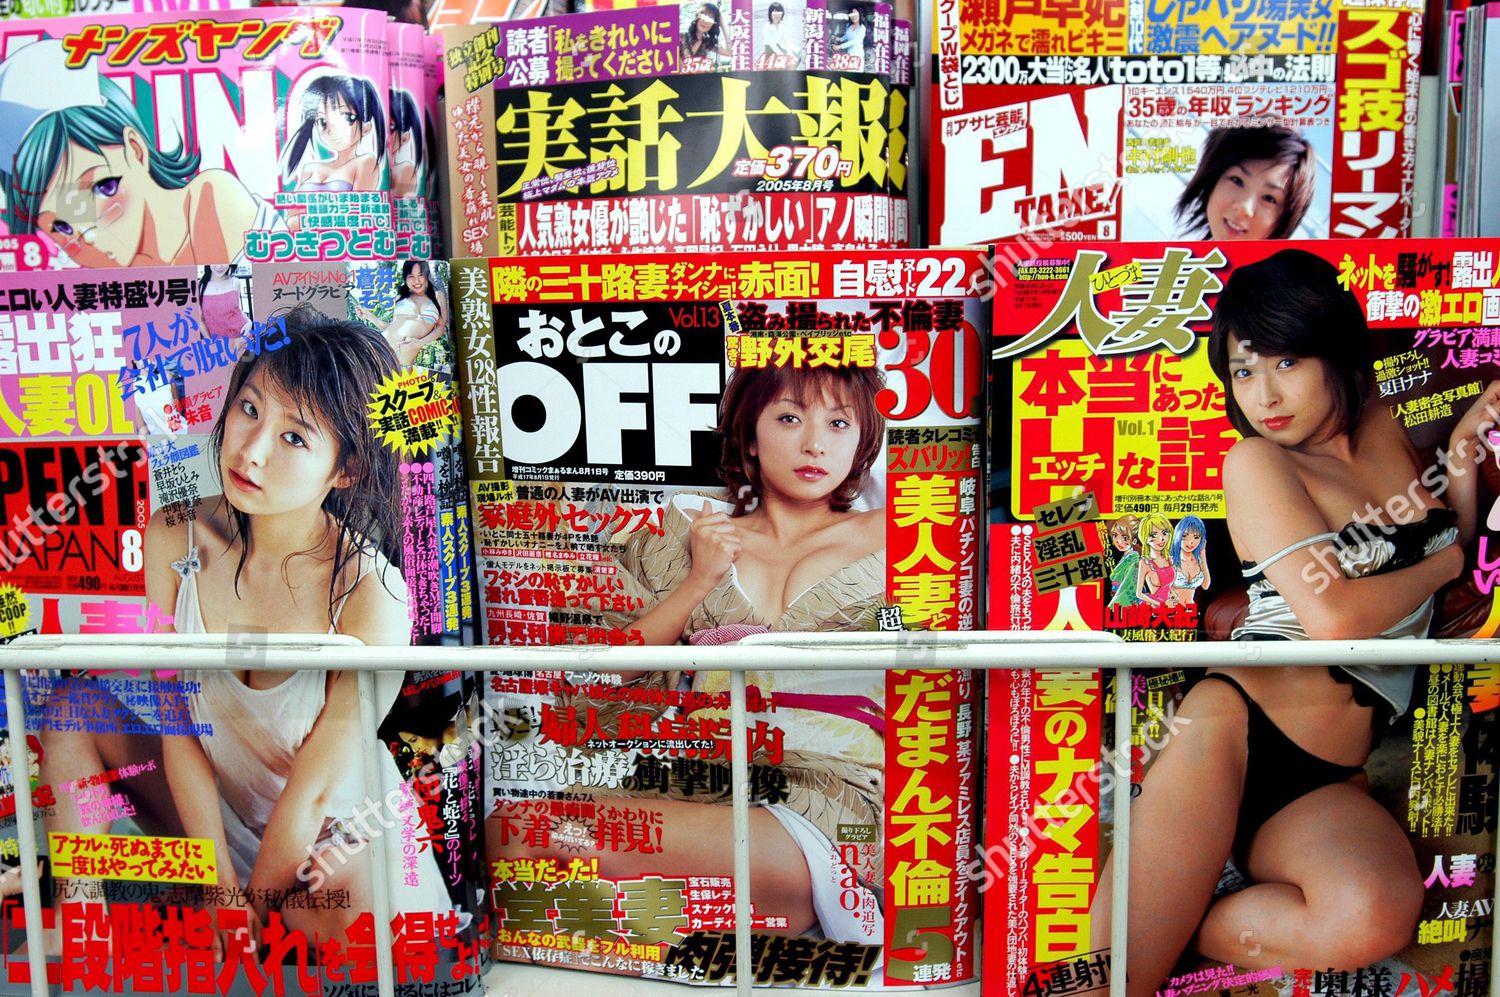 Japanese Soft Porn - Soft Porn Japanese Magazines On Rack Downtown Editorial ...